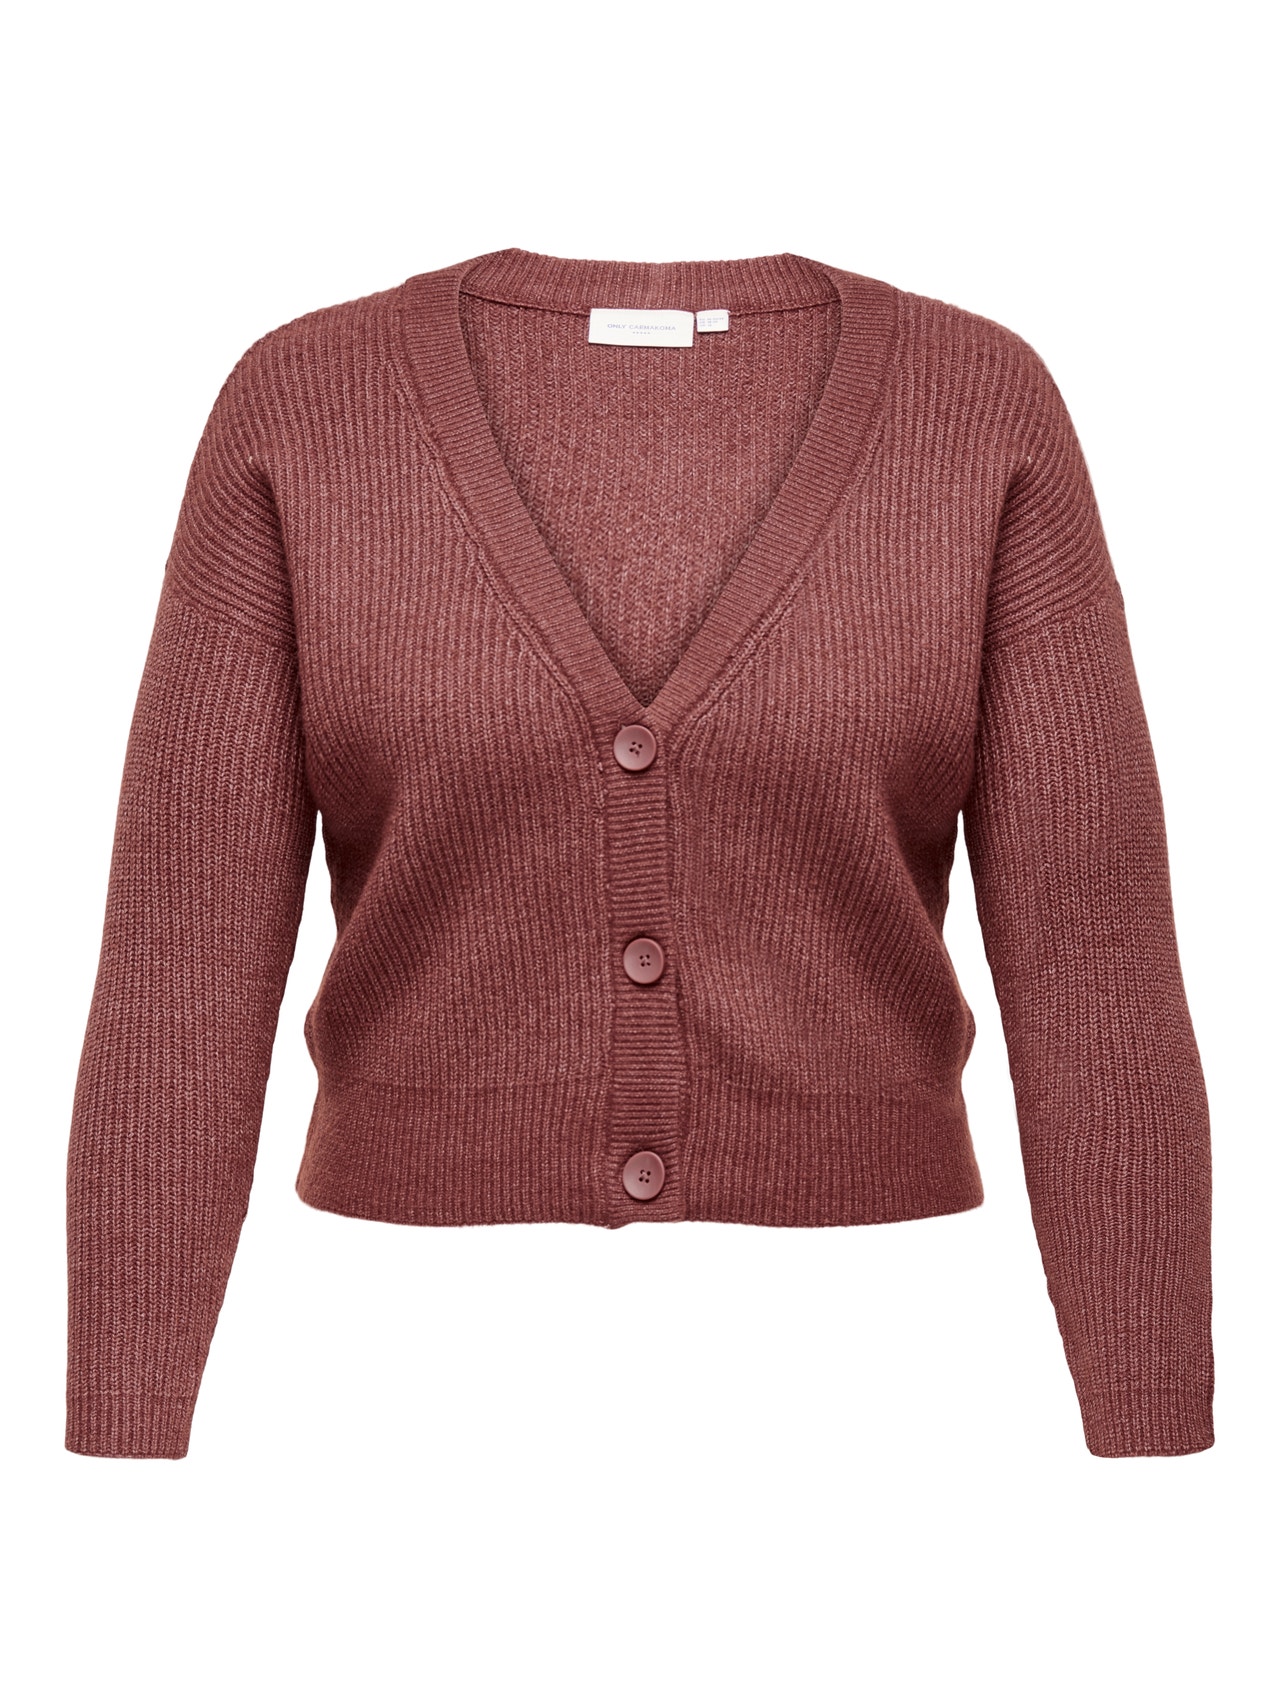 ONLY Curvy v-neck Knitted Cardigan -Spiced Apple - 15224984